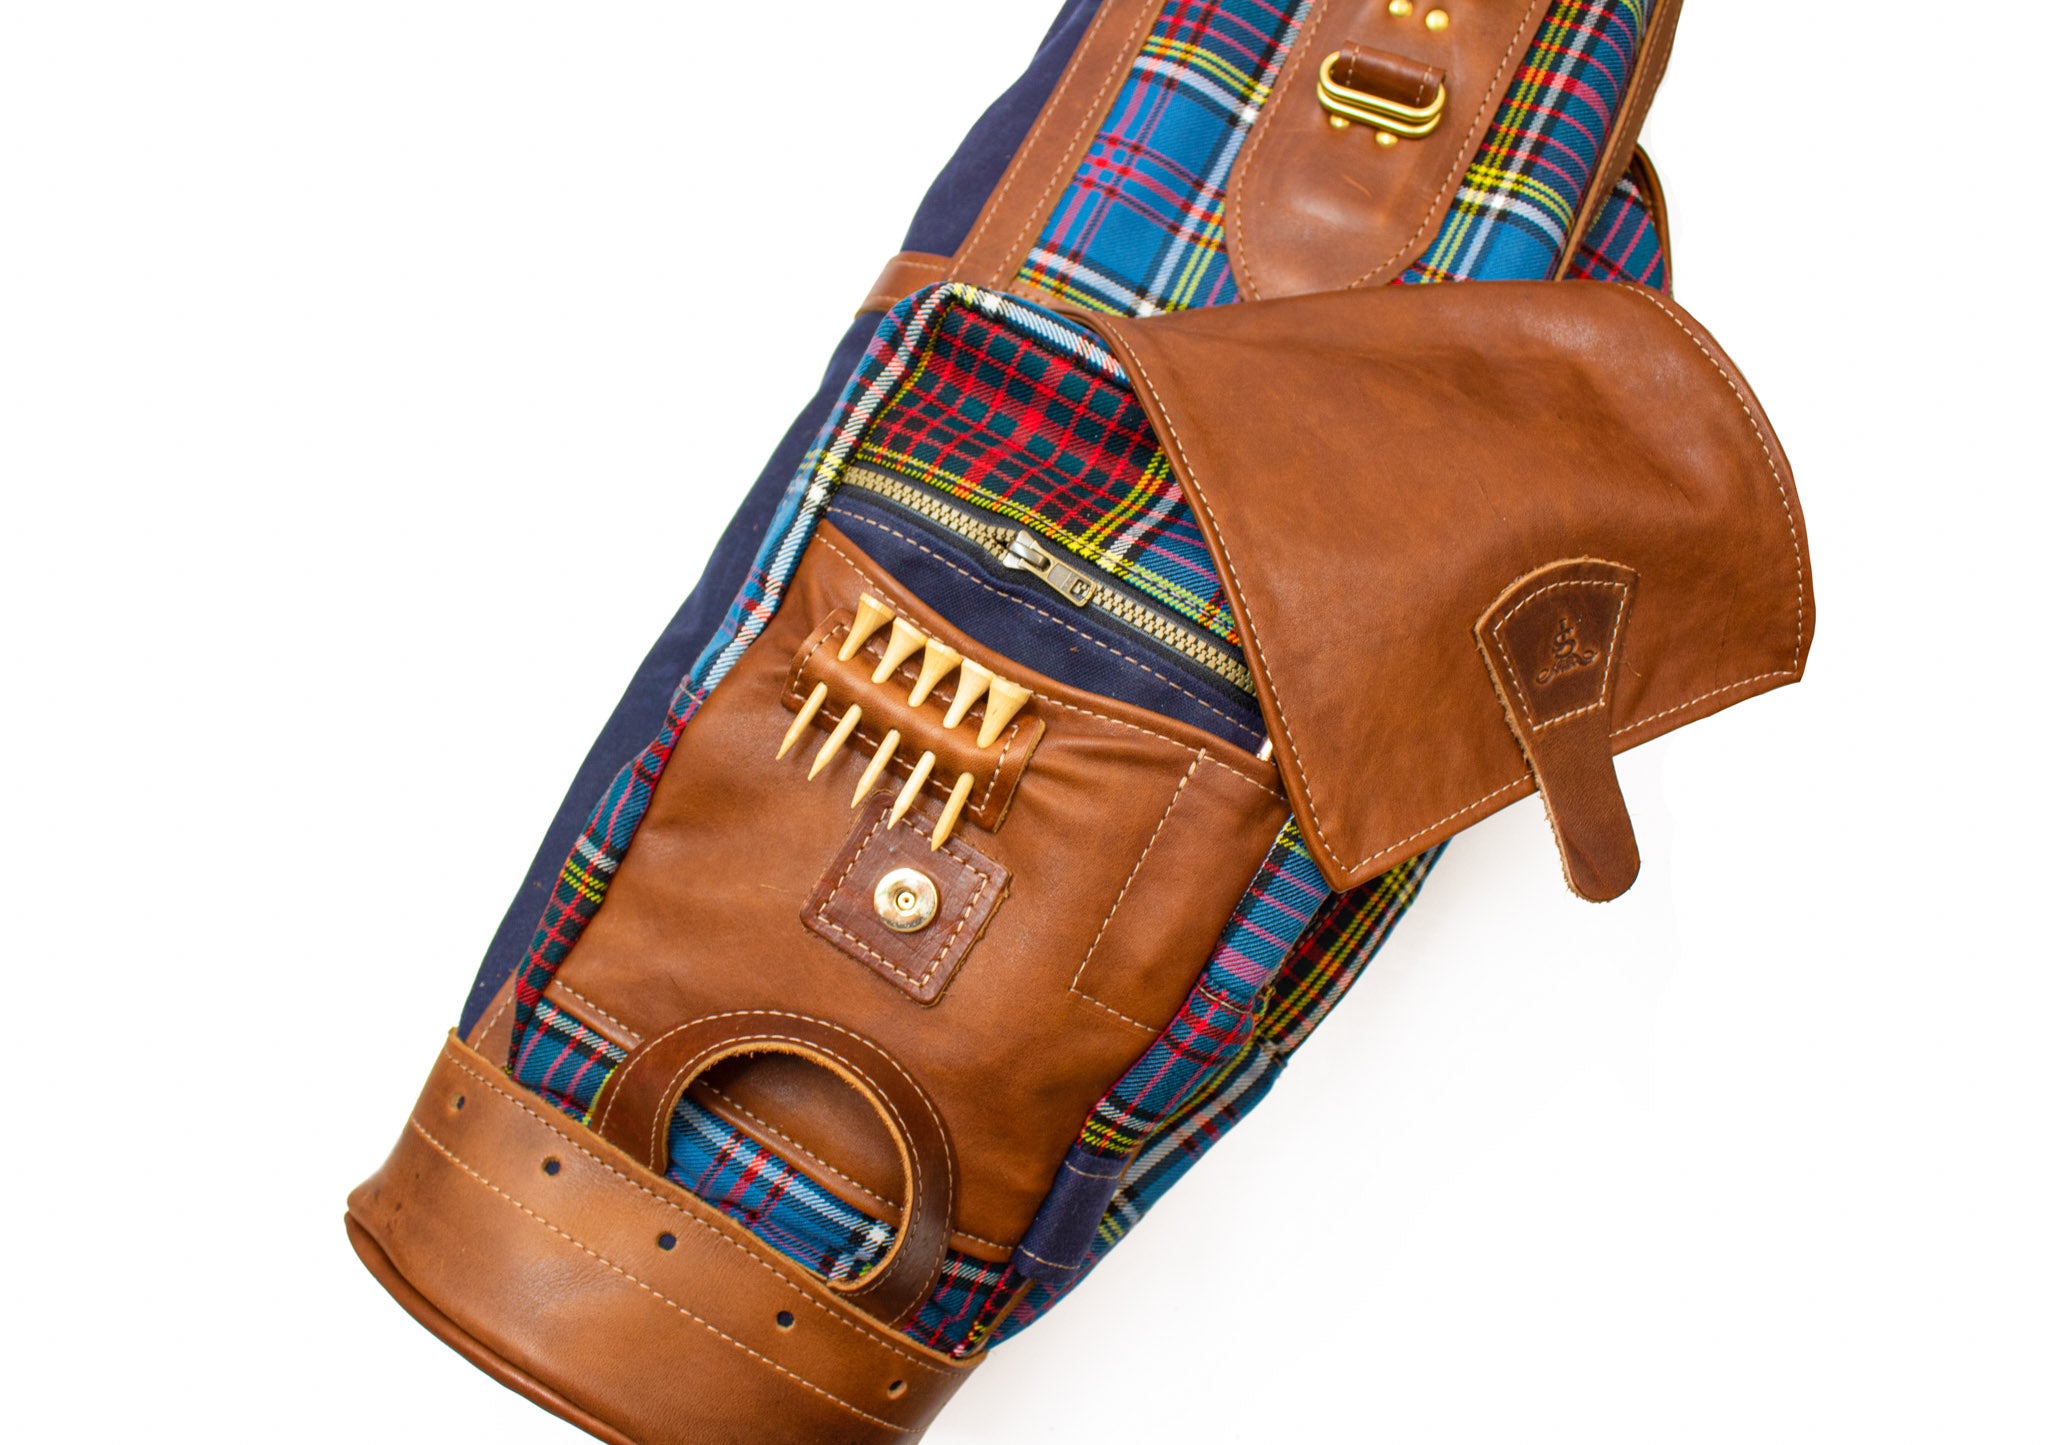 8 Airliner Style Golf Bag